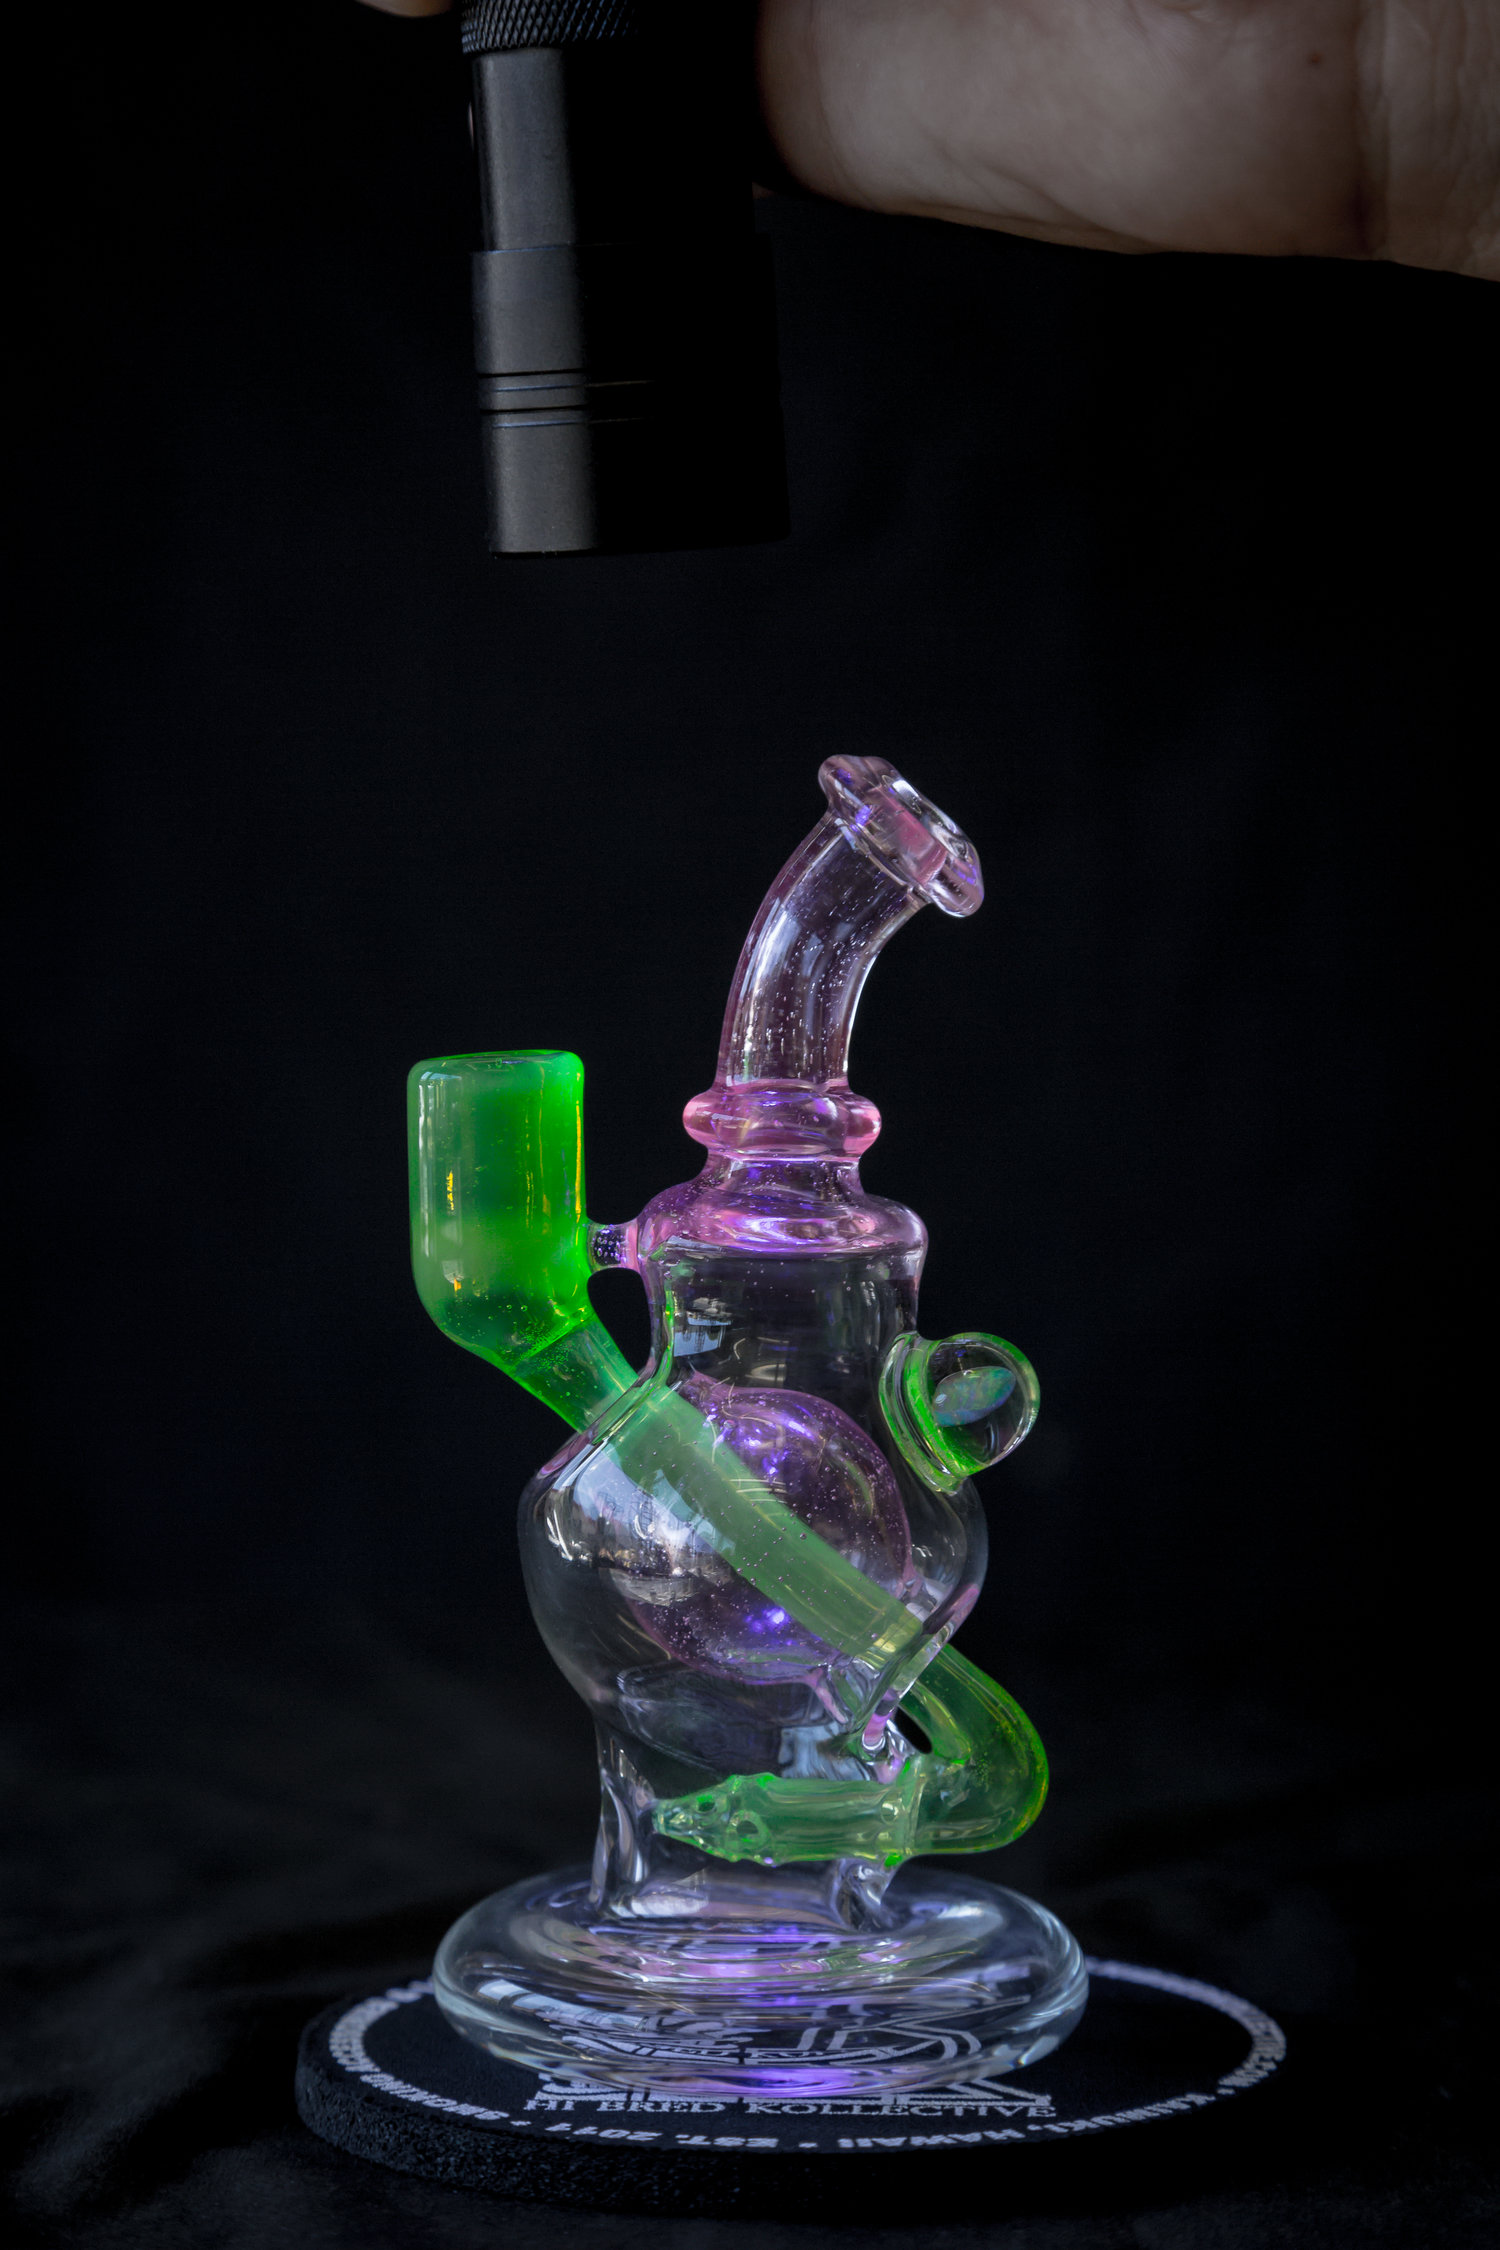 Home Blown Glass Road Straw Air-Cooled Dry Rig / $ 24.99 at 420